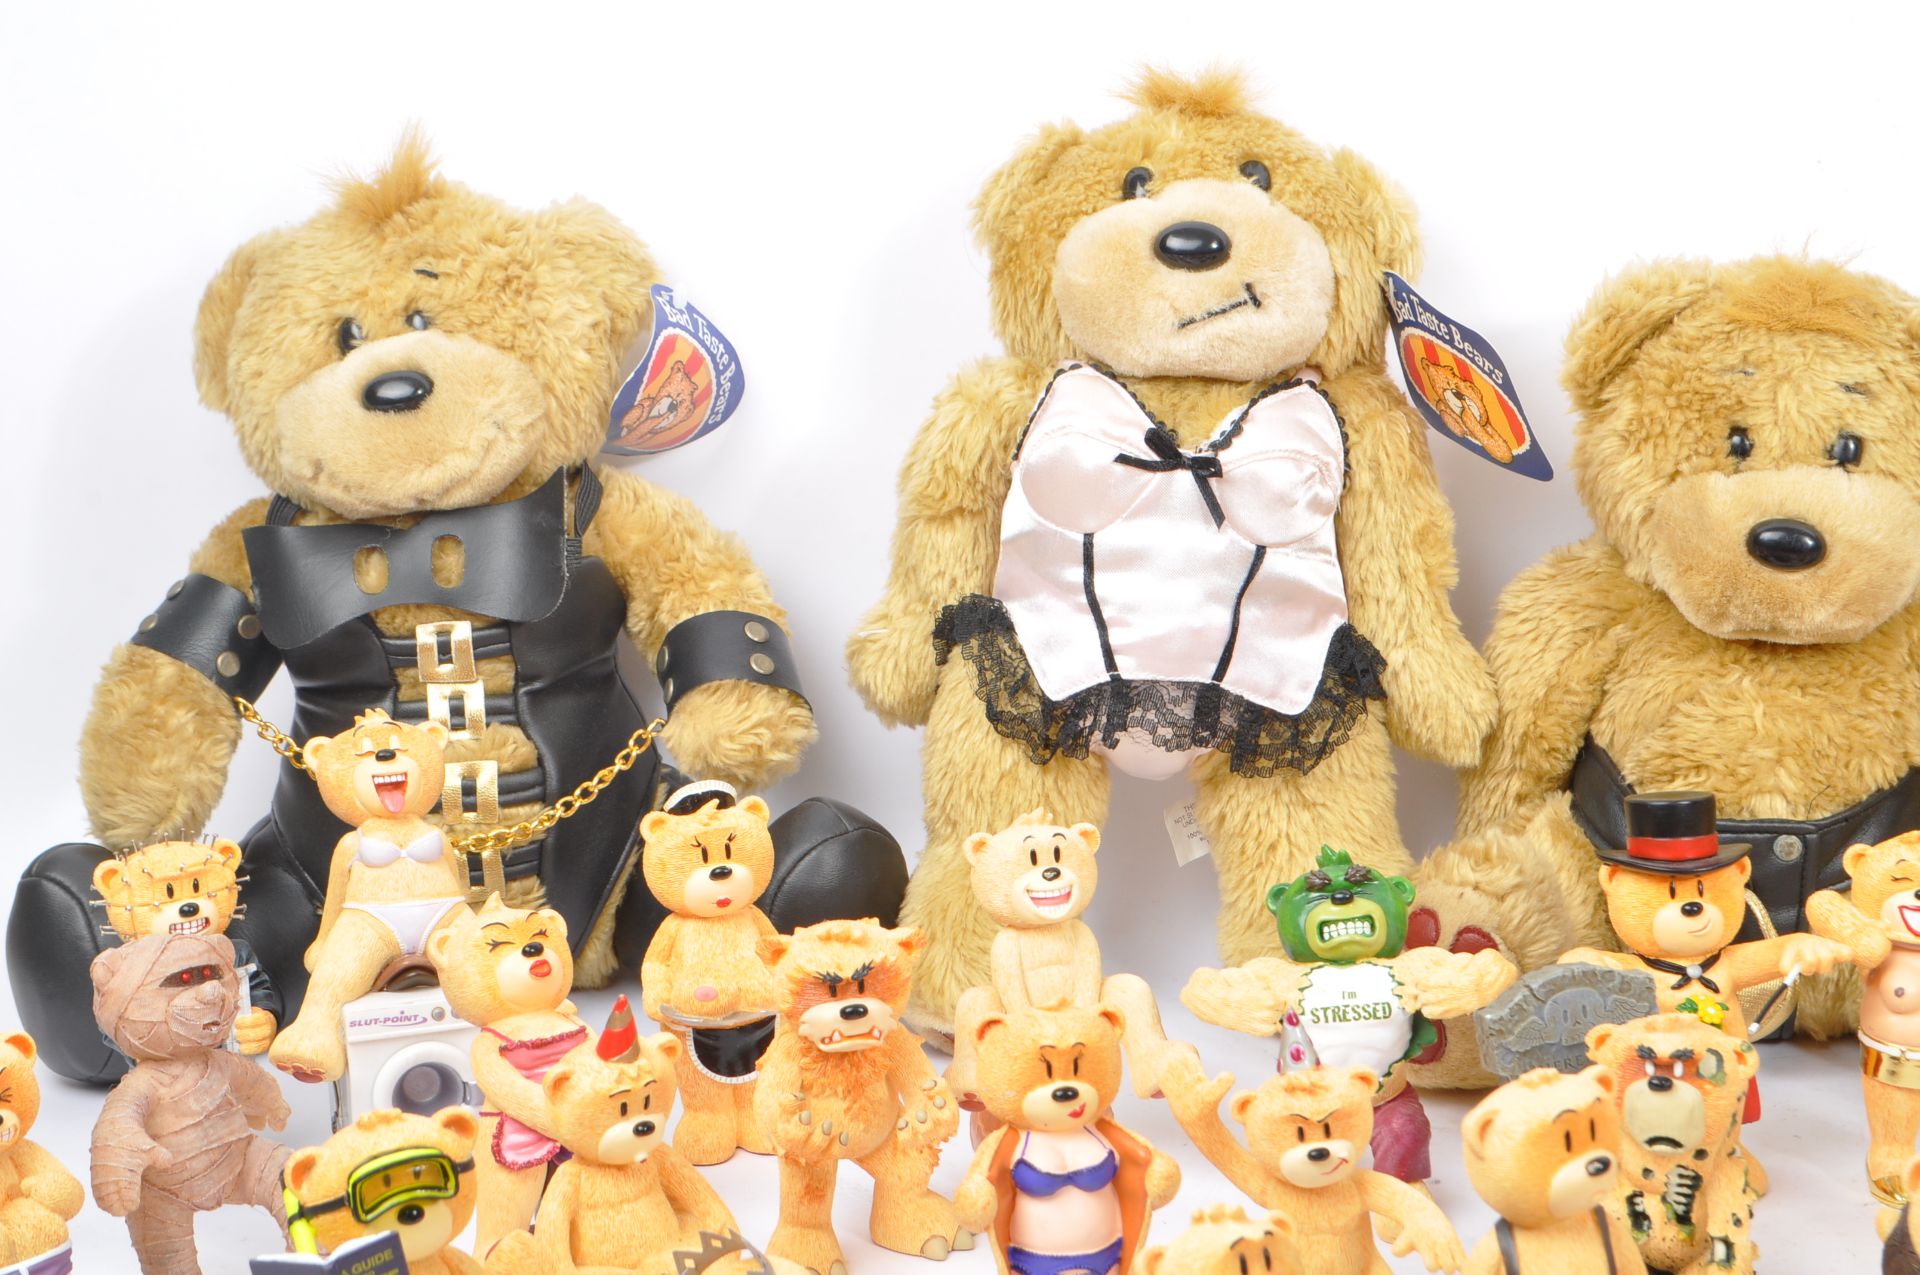 LARGE COLLECTION OF BAD TASTE BEARS FIGURINES - Image 10 of 12